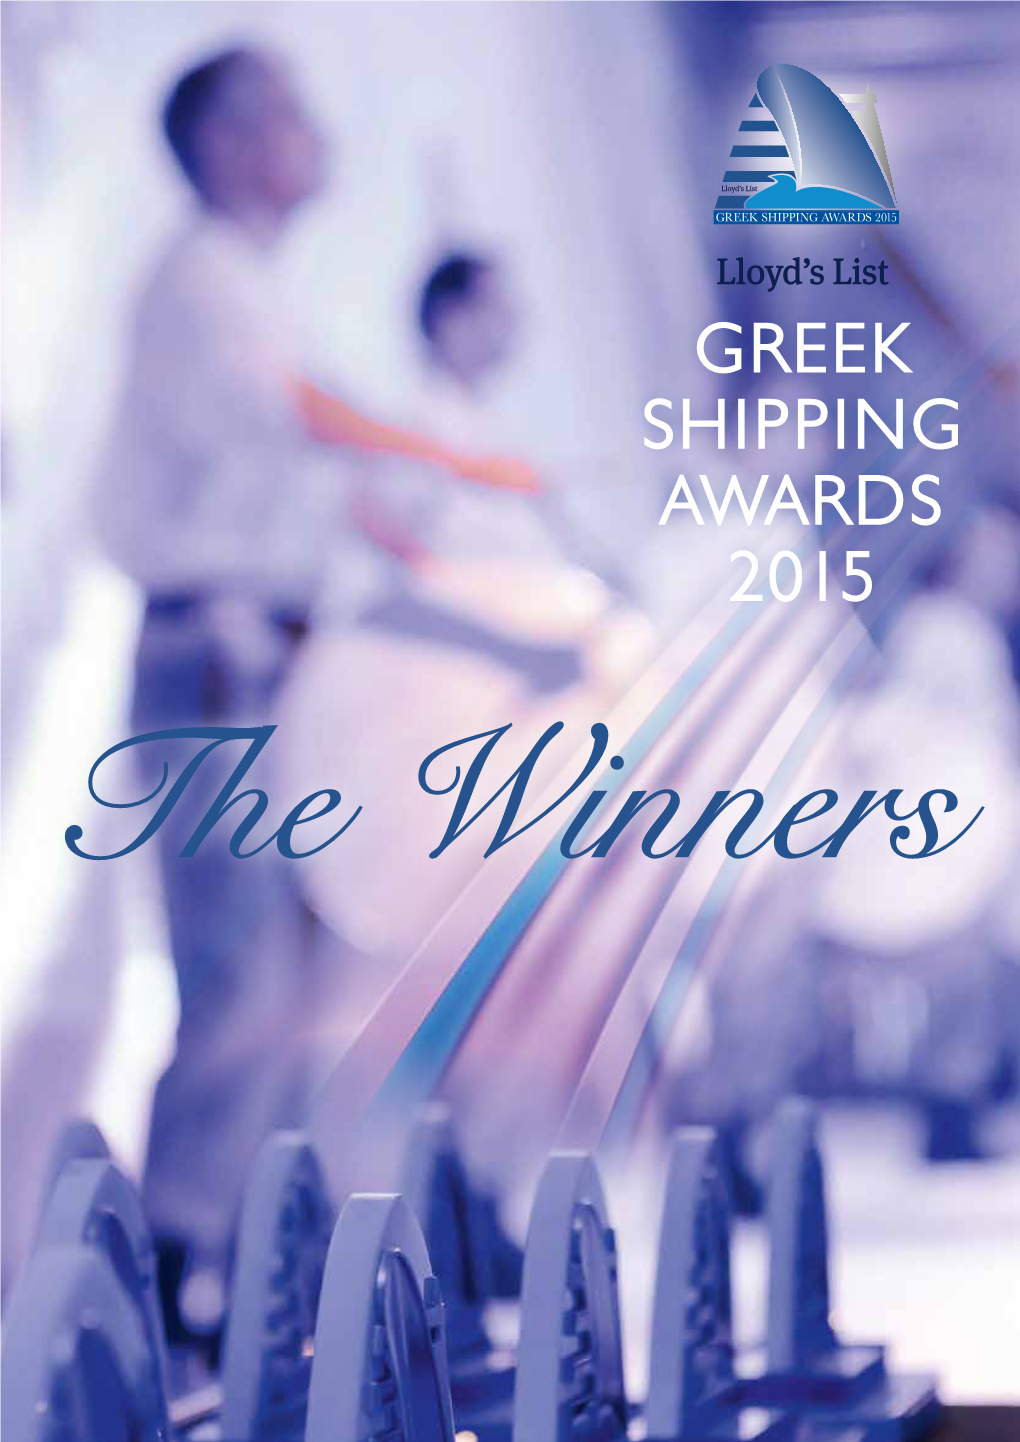 GREEK SHIPPING AWARDS 2015 the Winners Contents